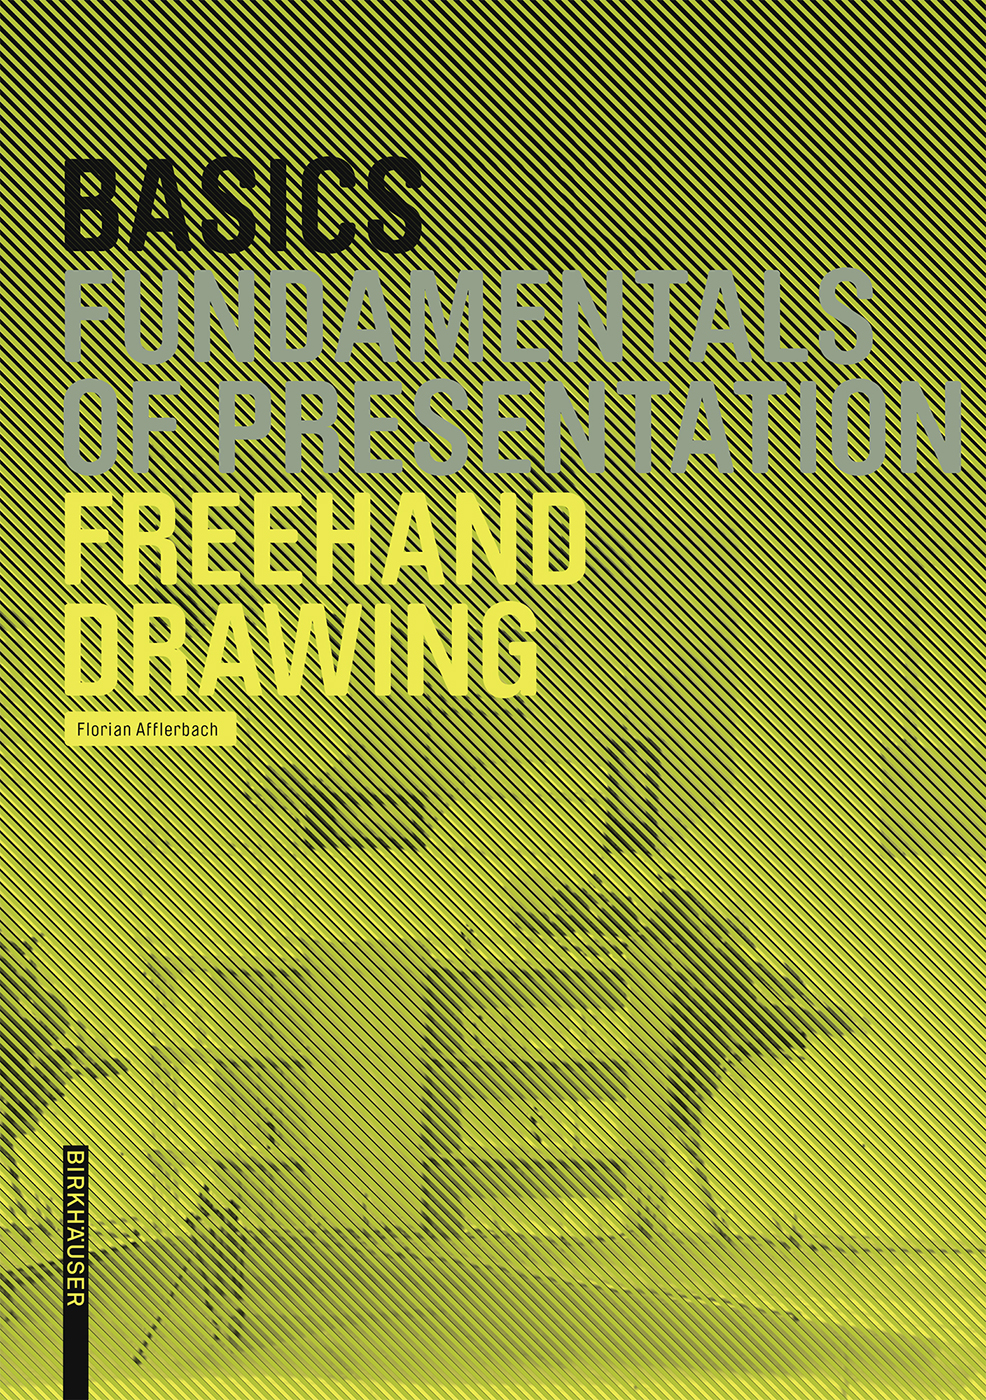 Florian Afflerbach Freehand Drawing BIRKHUSER BASEL Contents Foreword For - photo 1